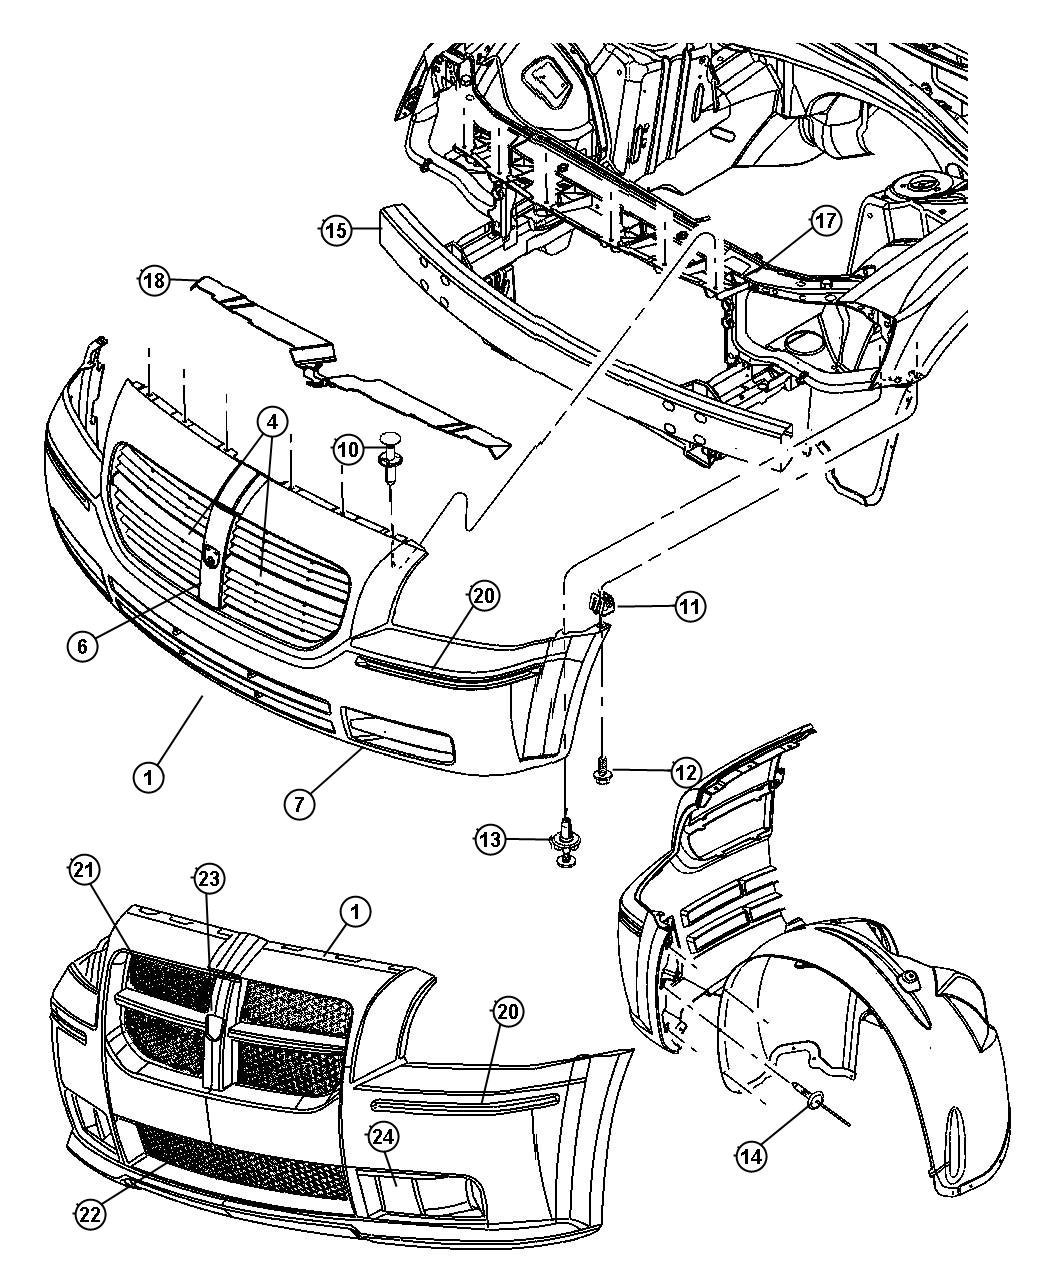 Grille and Related Parts - 49. Diagram